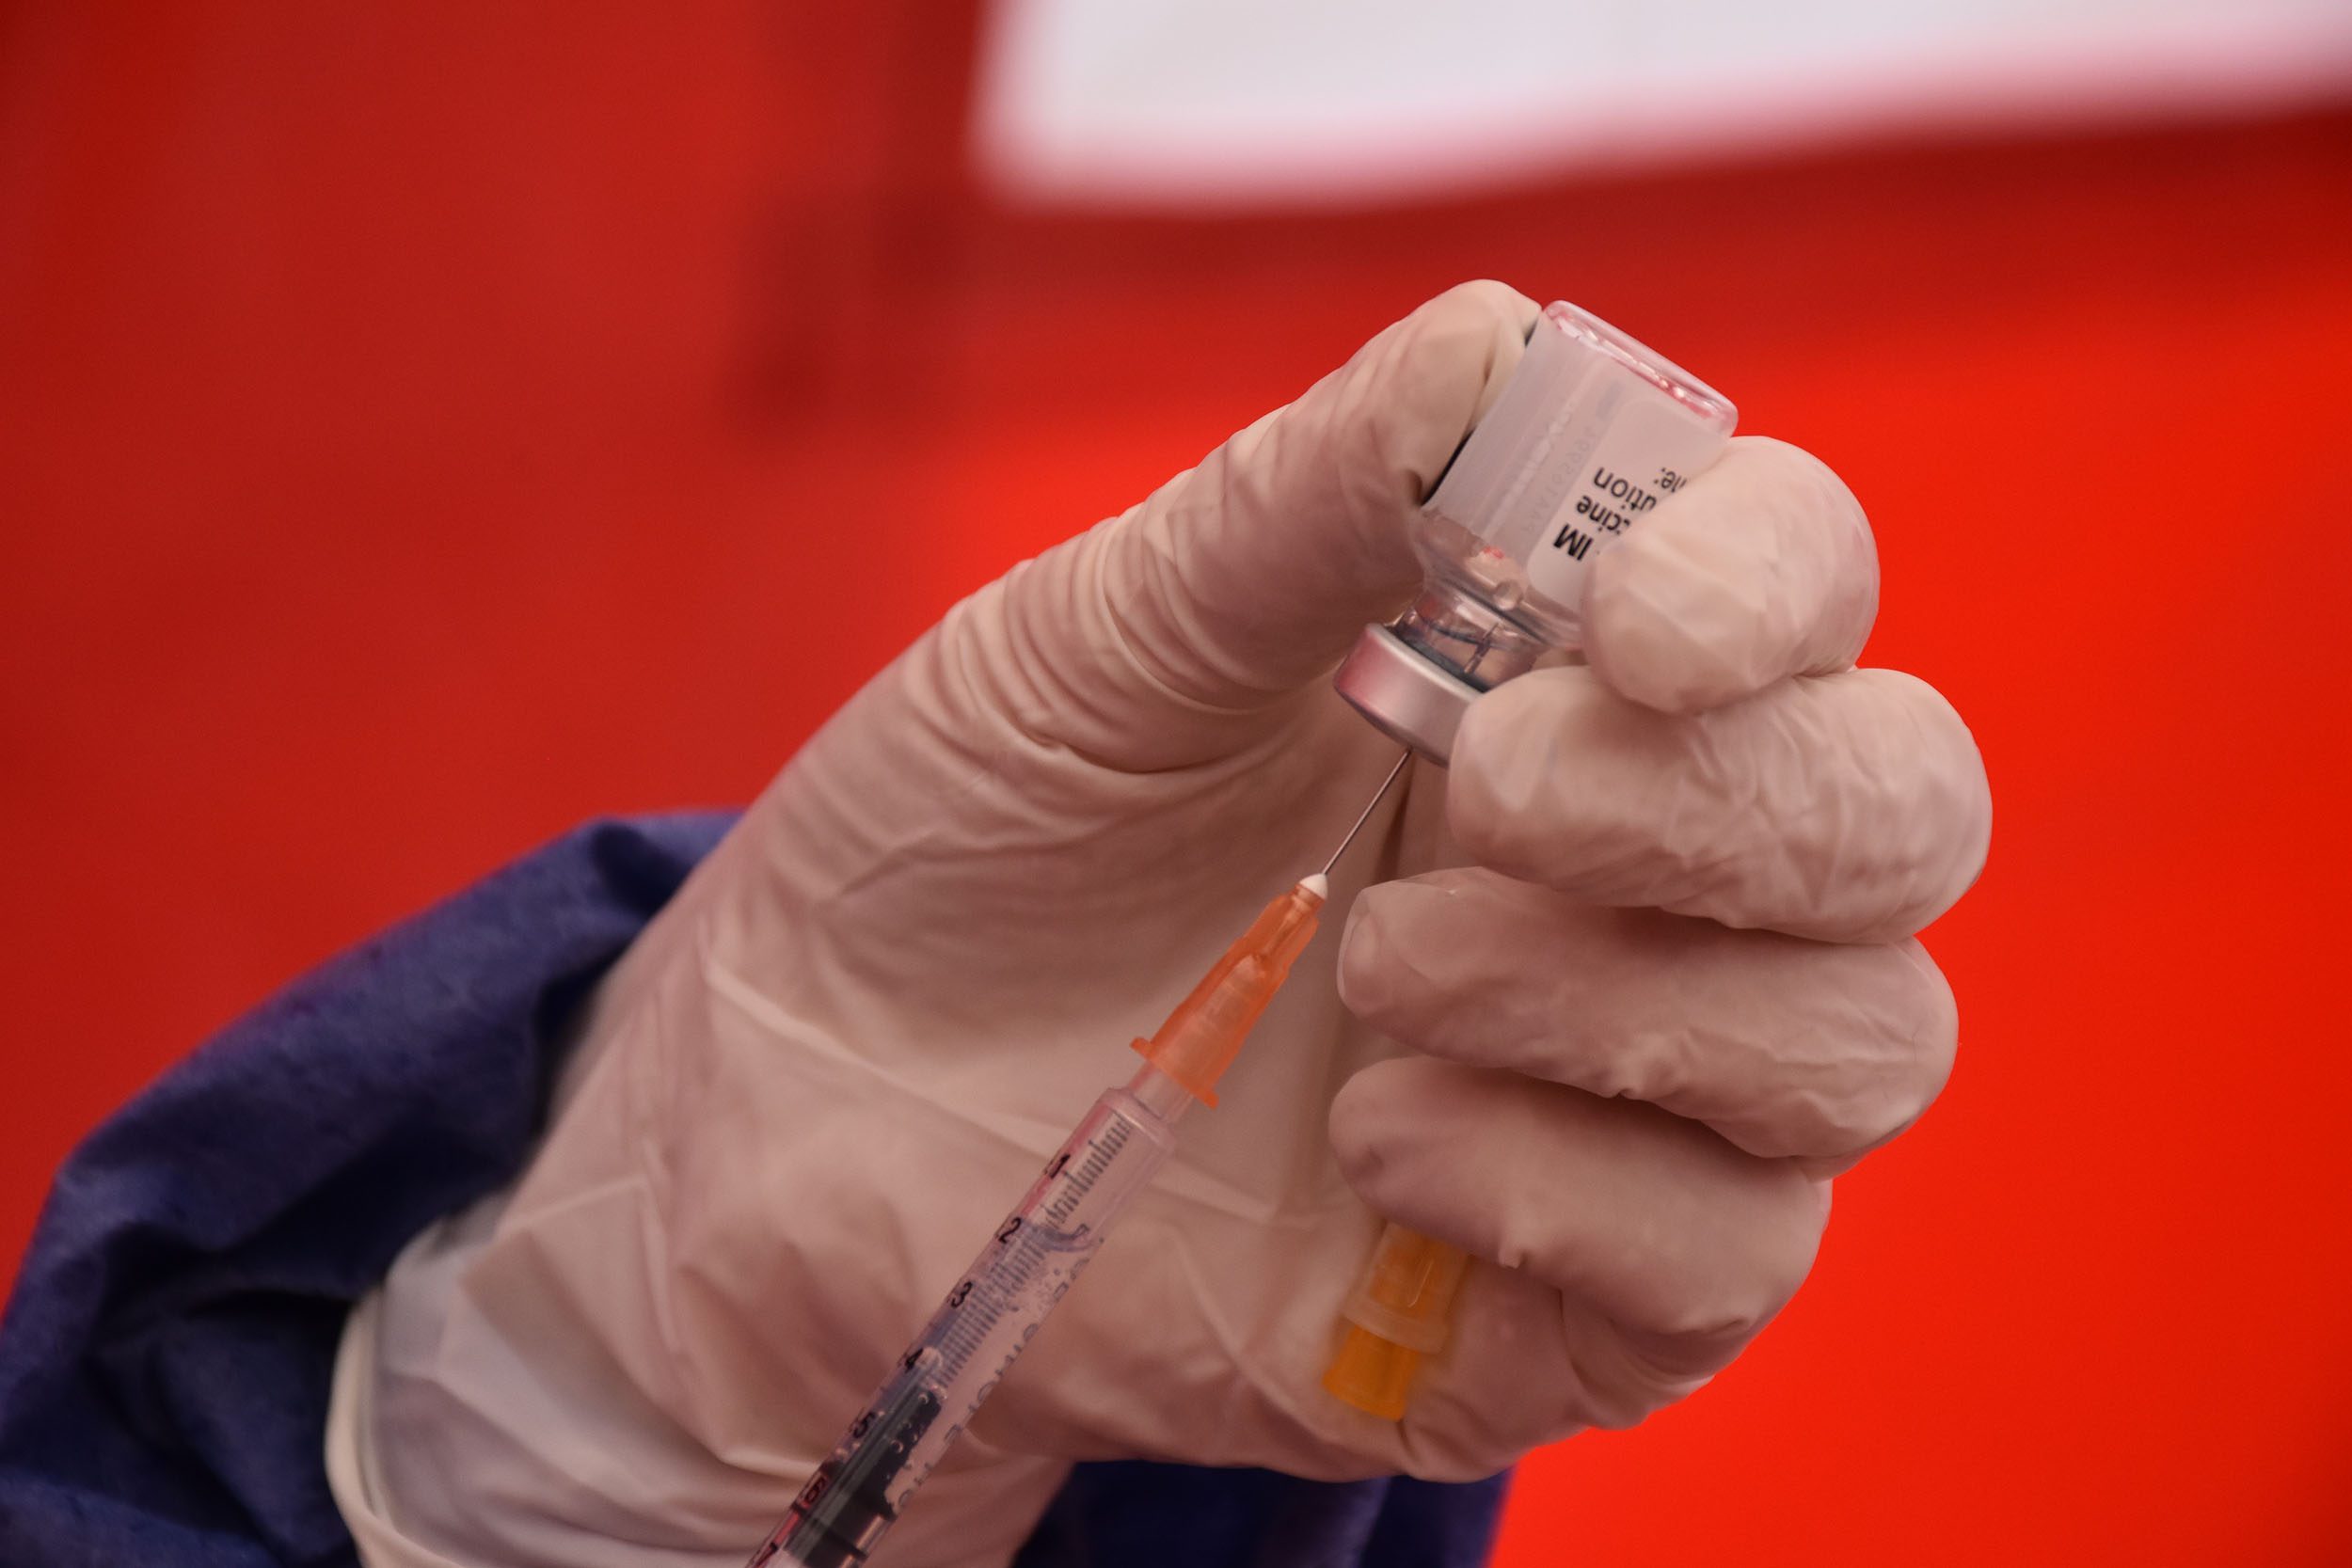 Turkey has administered over 120.11 million doses of COVID-19 vaccines